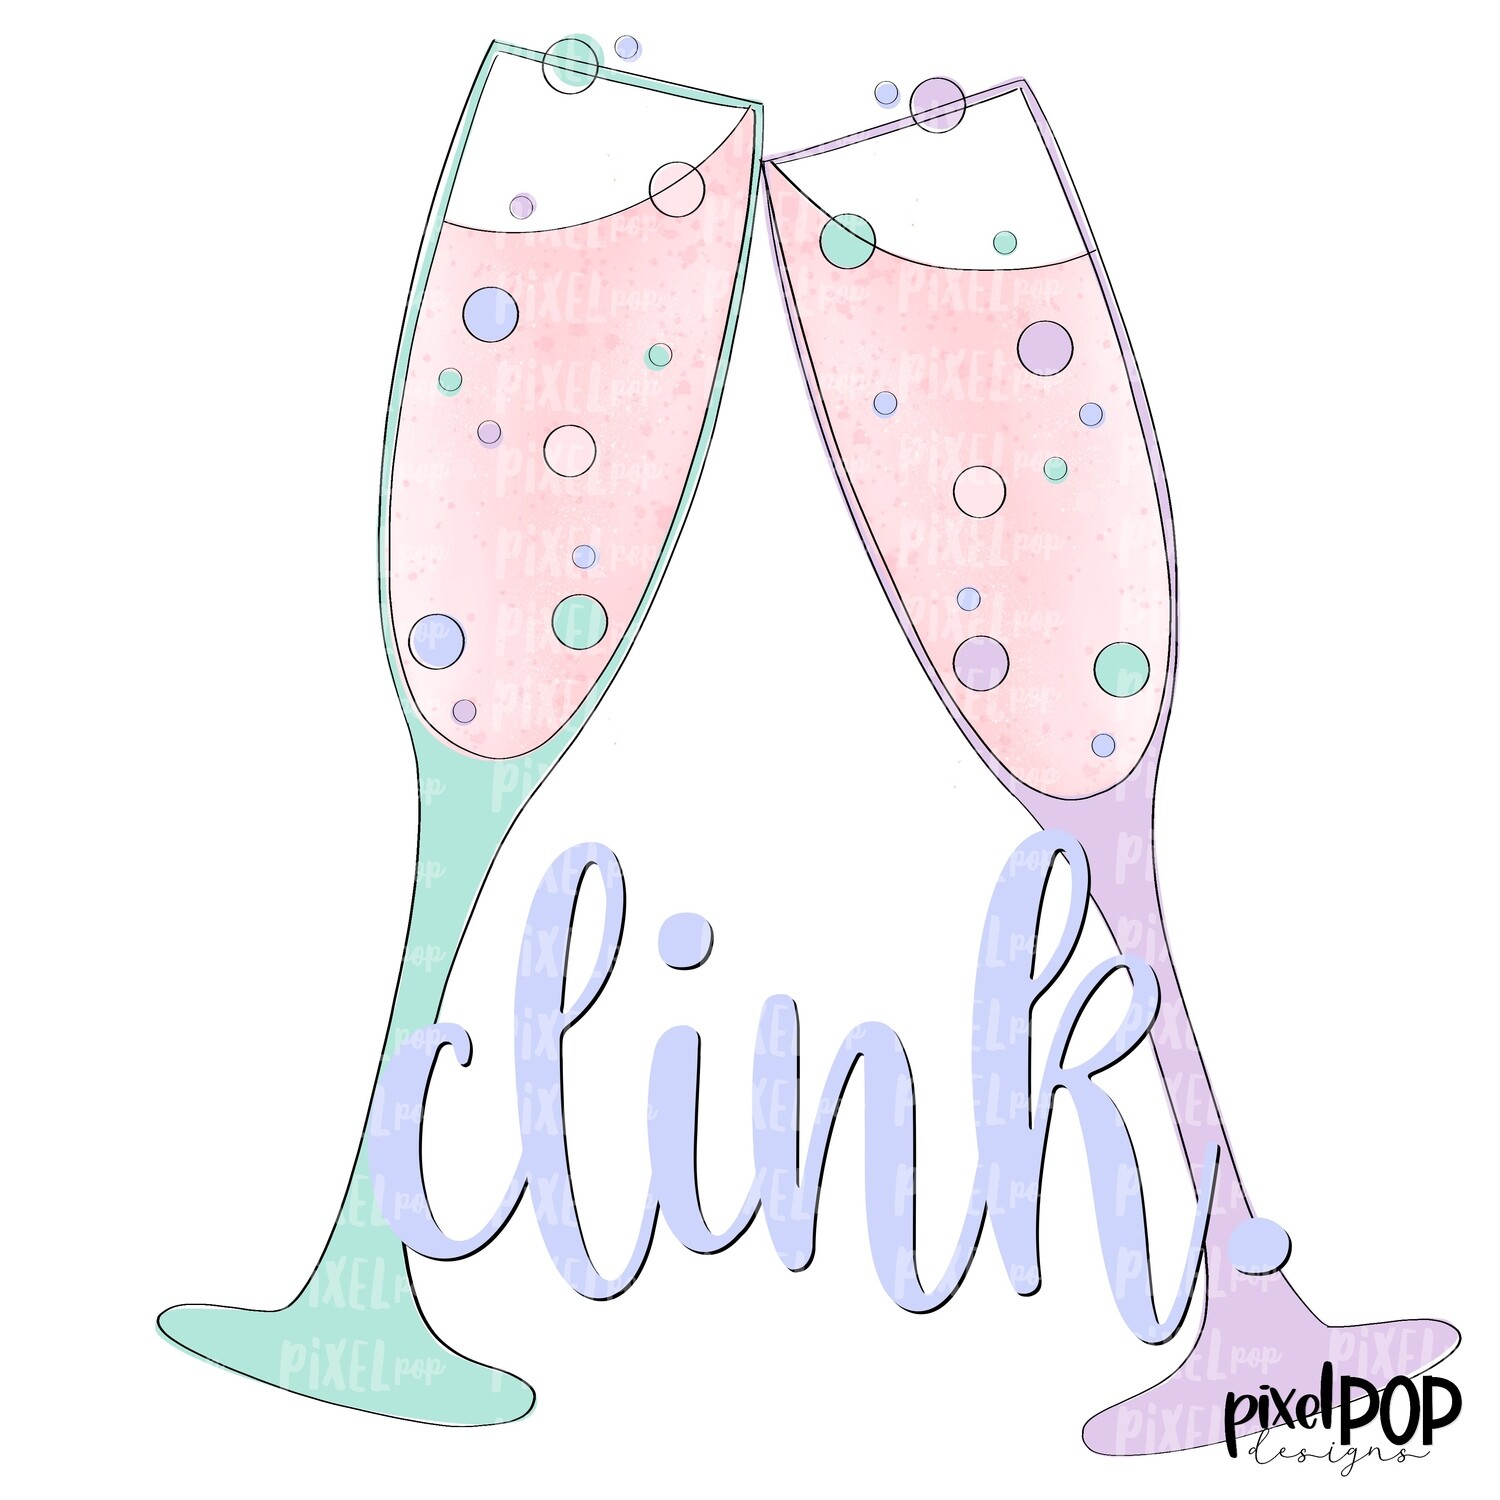 Clink Cheers Champagne Bubbly Design | New Years | Celebration Design | Party Design | Sublimation PNG | Quotes | Printable Artwork | Art